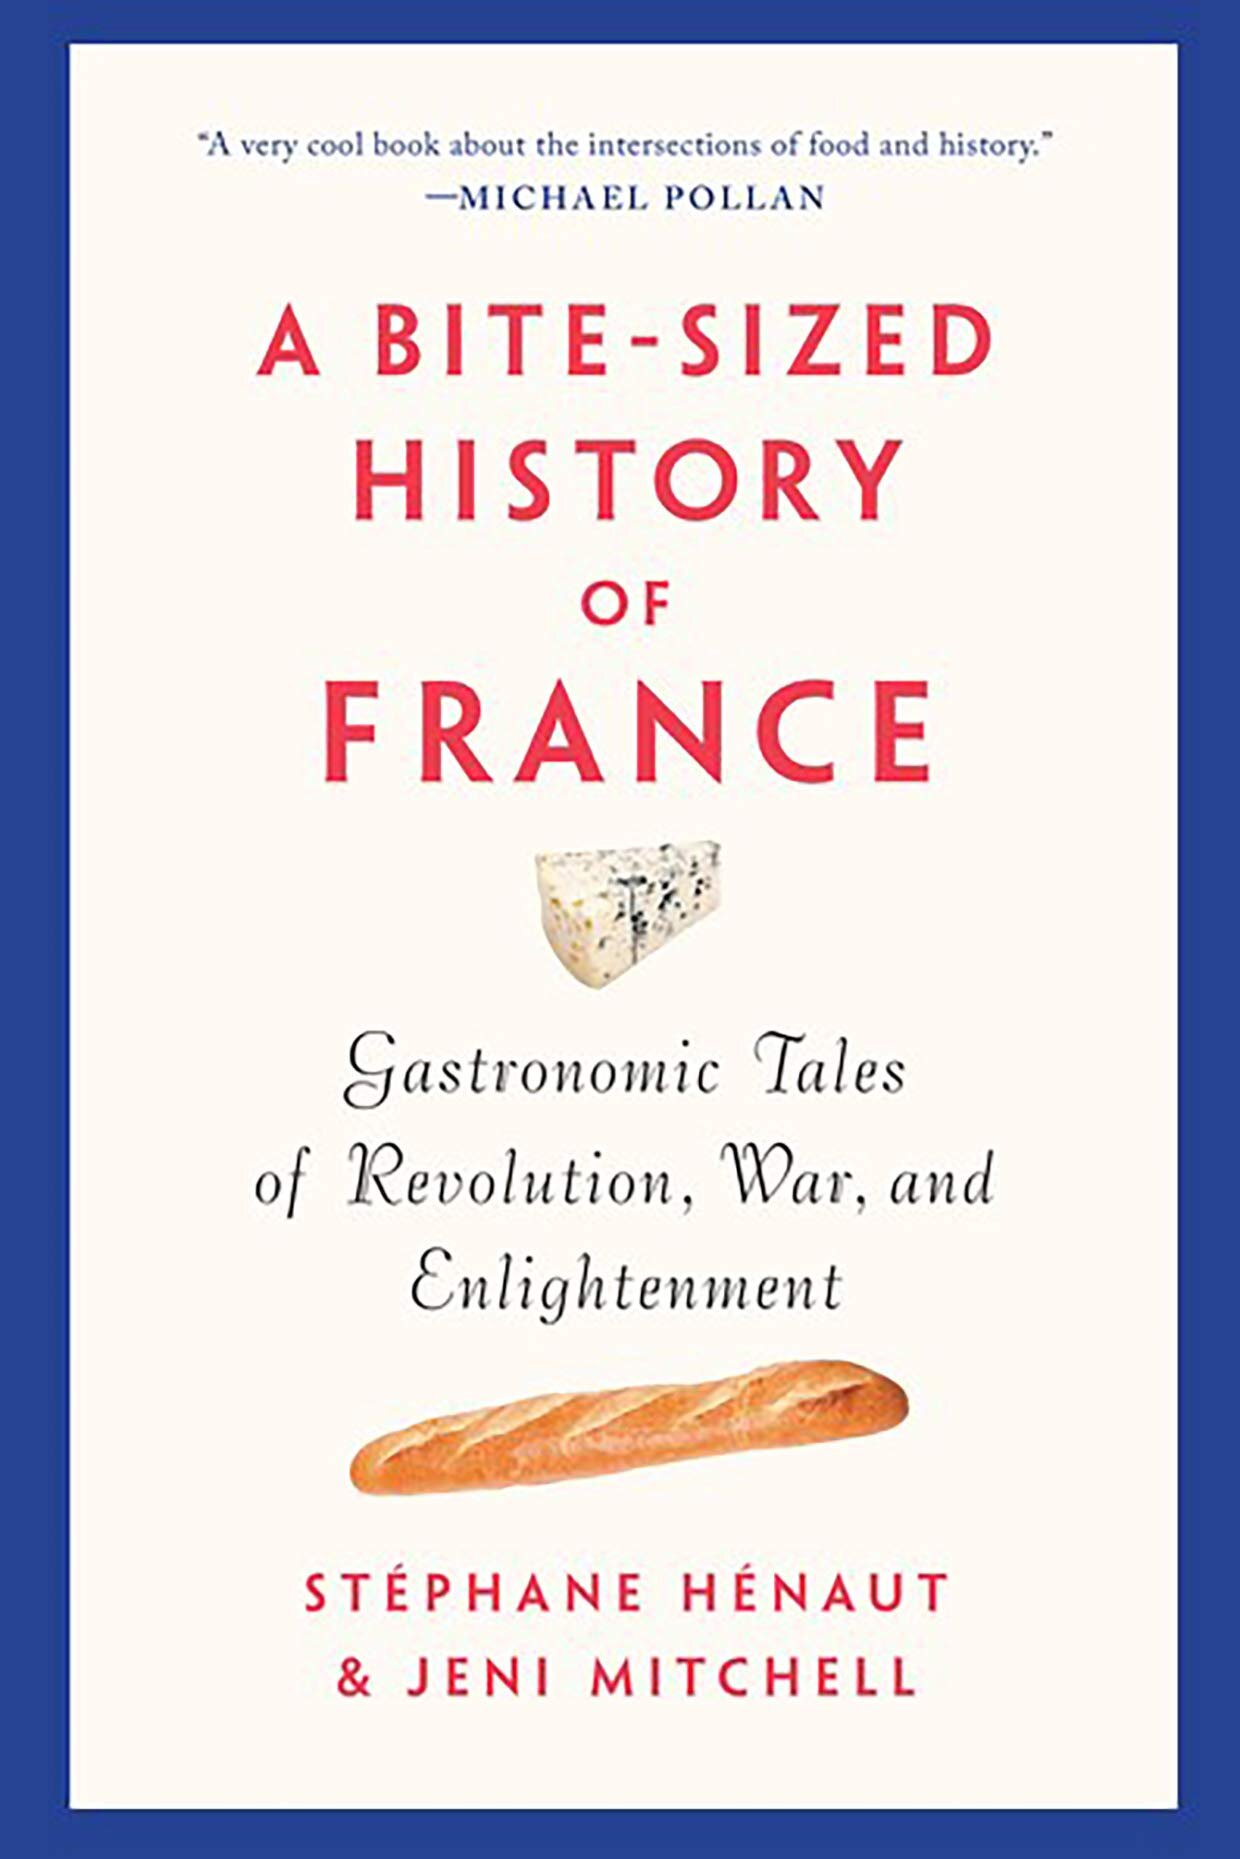 A Bite-Sized History of France- Gastronomic Tales of Revolution War and Enlightenment